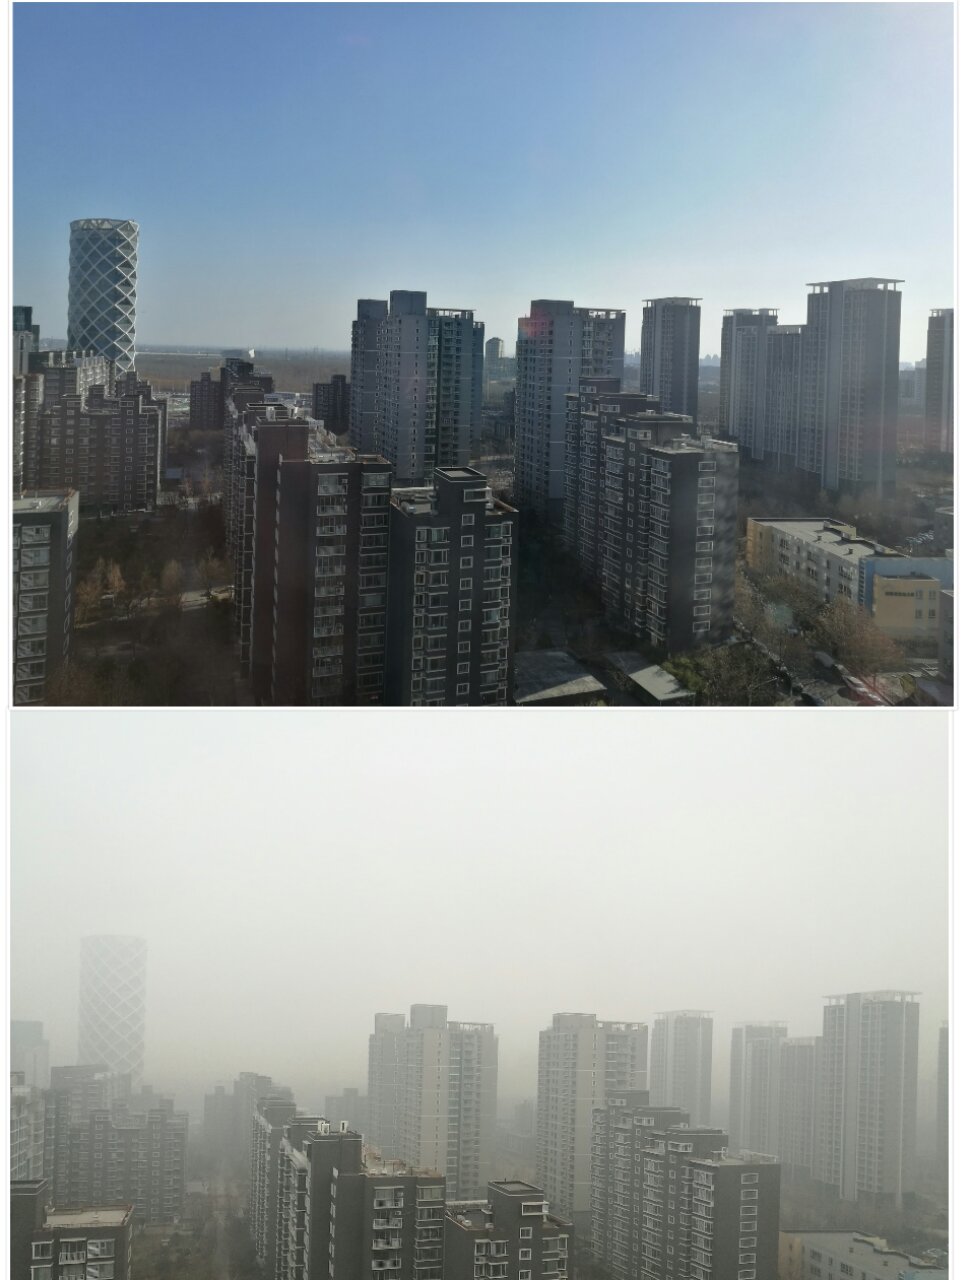 How I got clean air in my apartment in Beijing